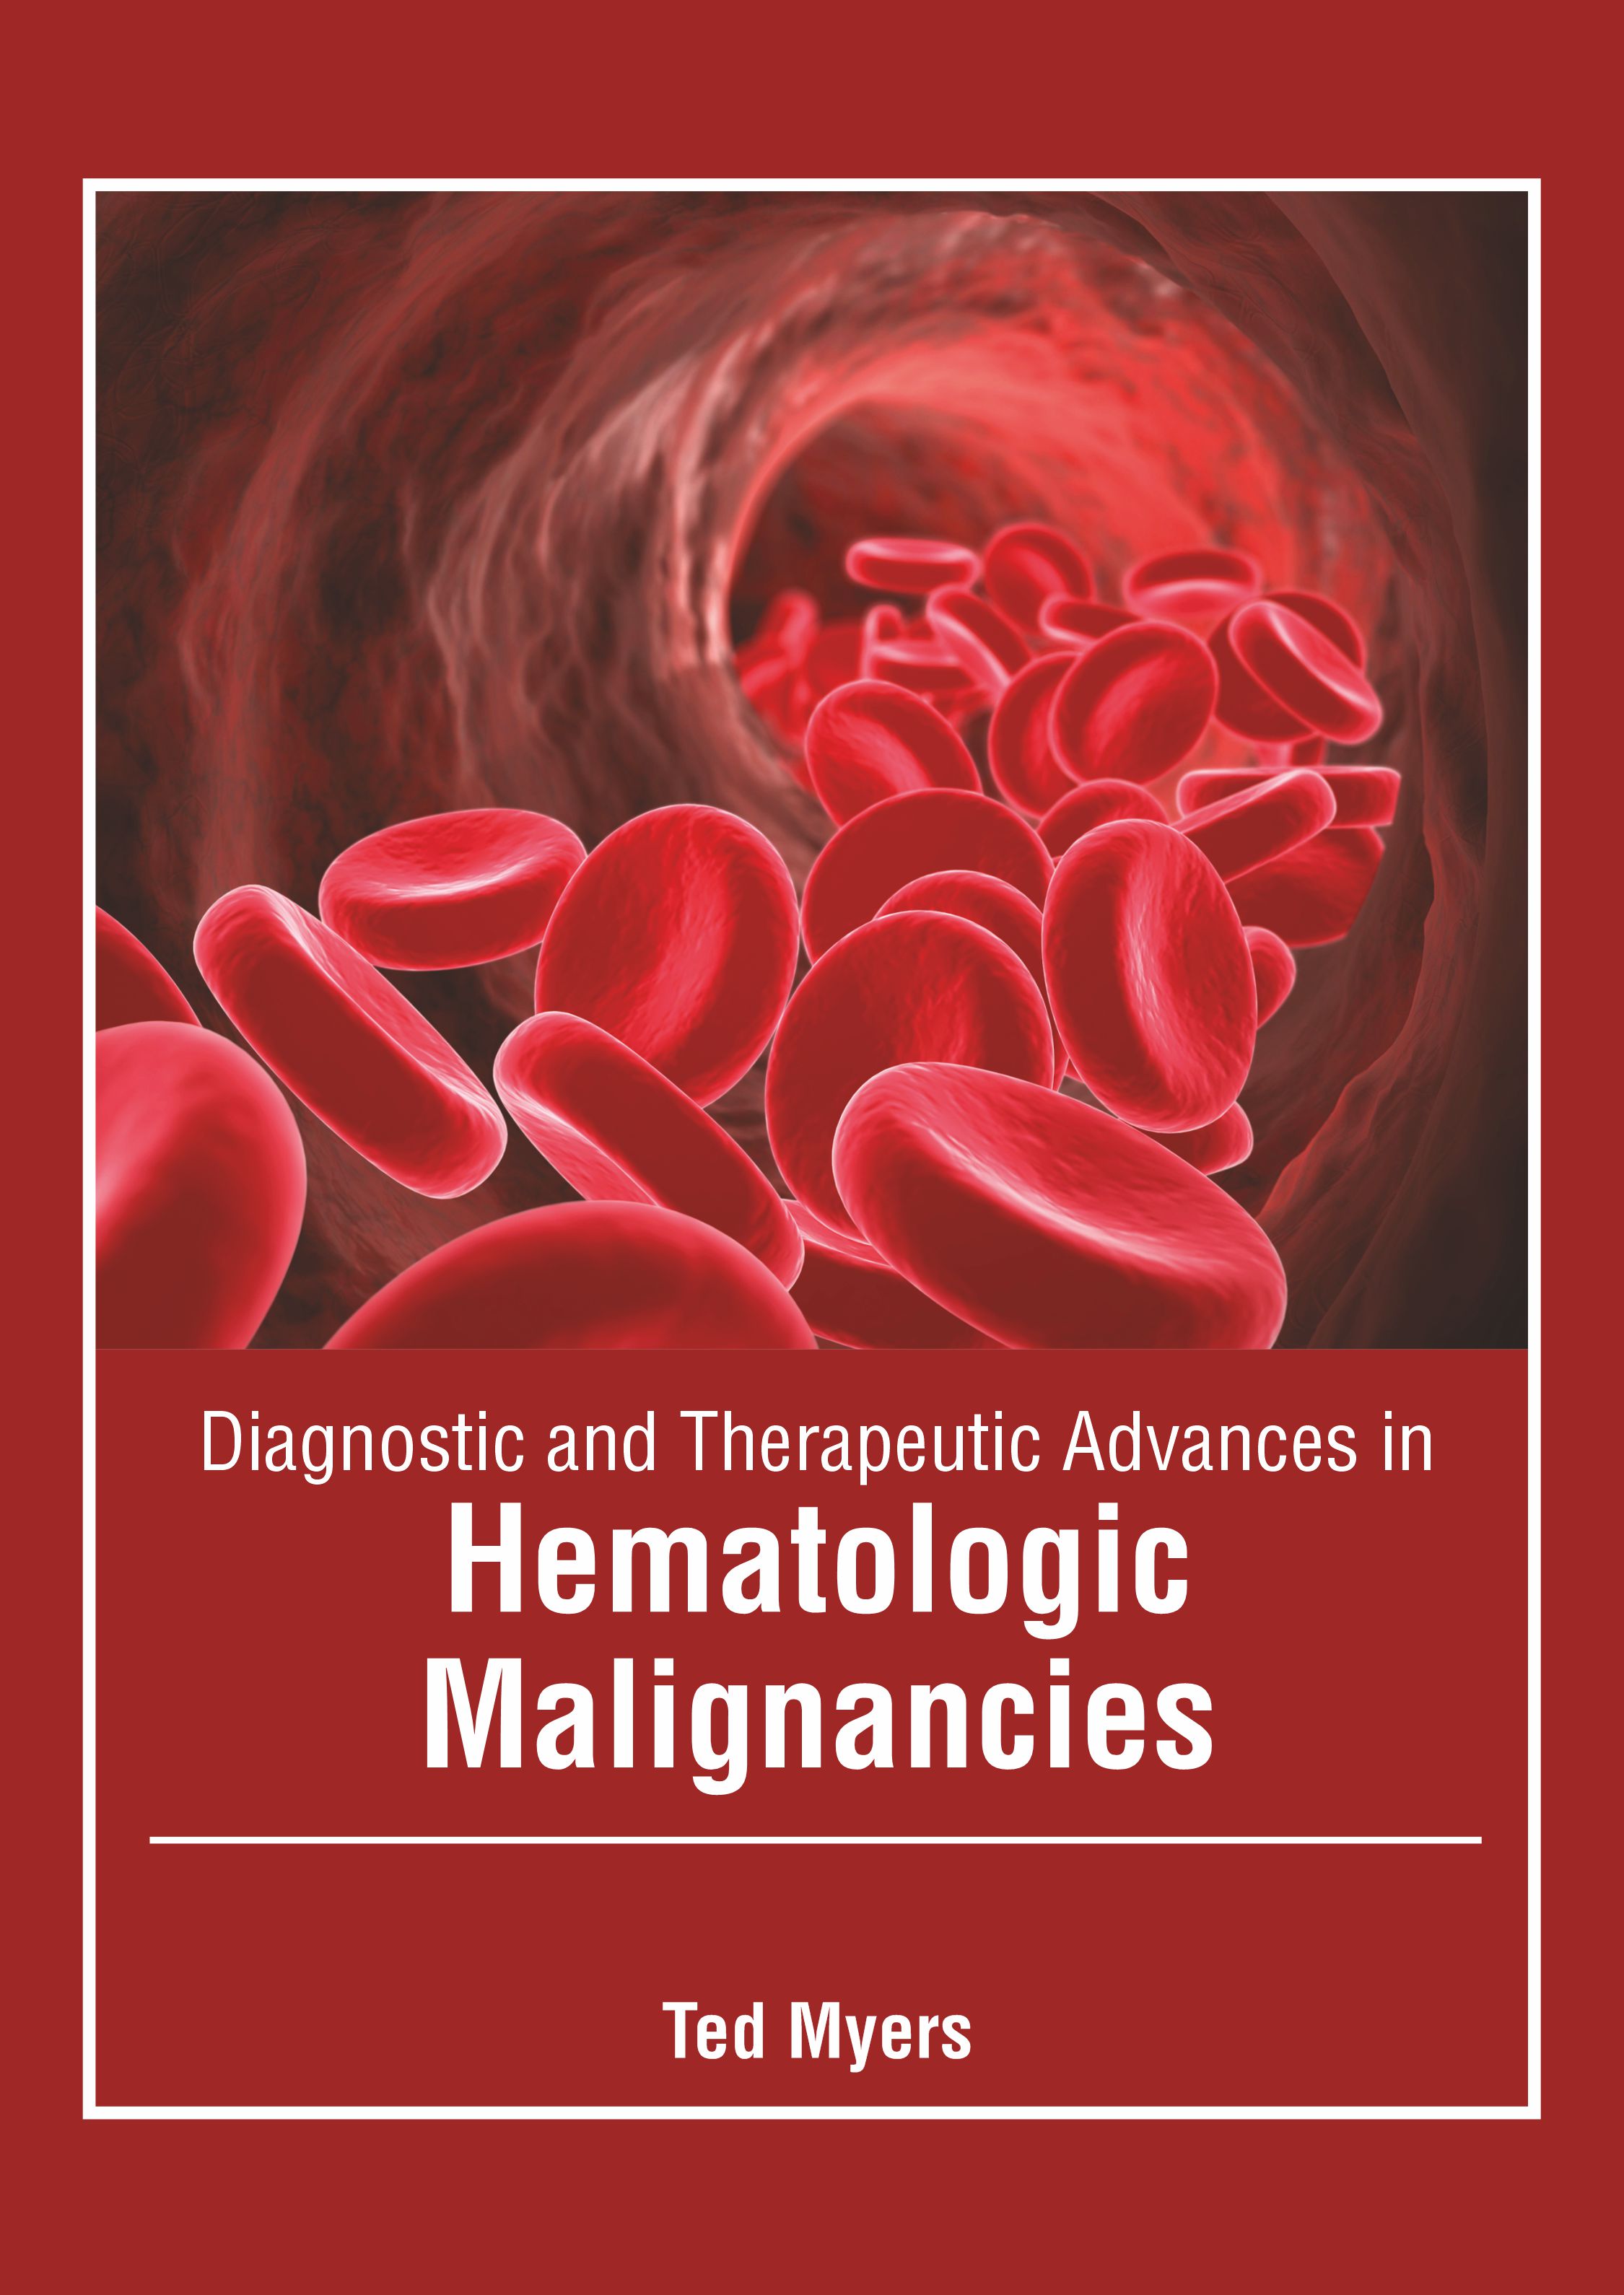 

medical-reference-books/oncology/diagnostic-and-therapeutic-advances-in-hematologic-malignancies-9781639273515